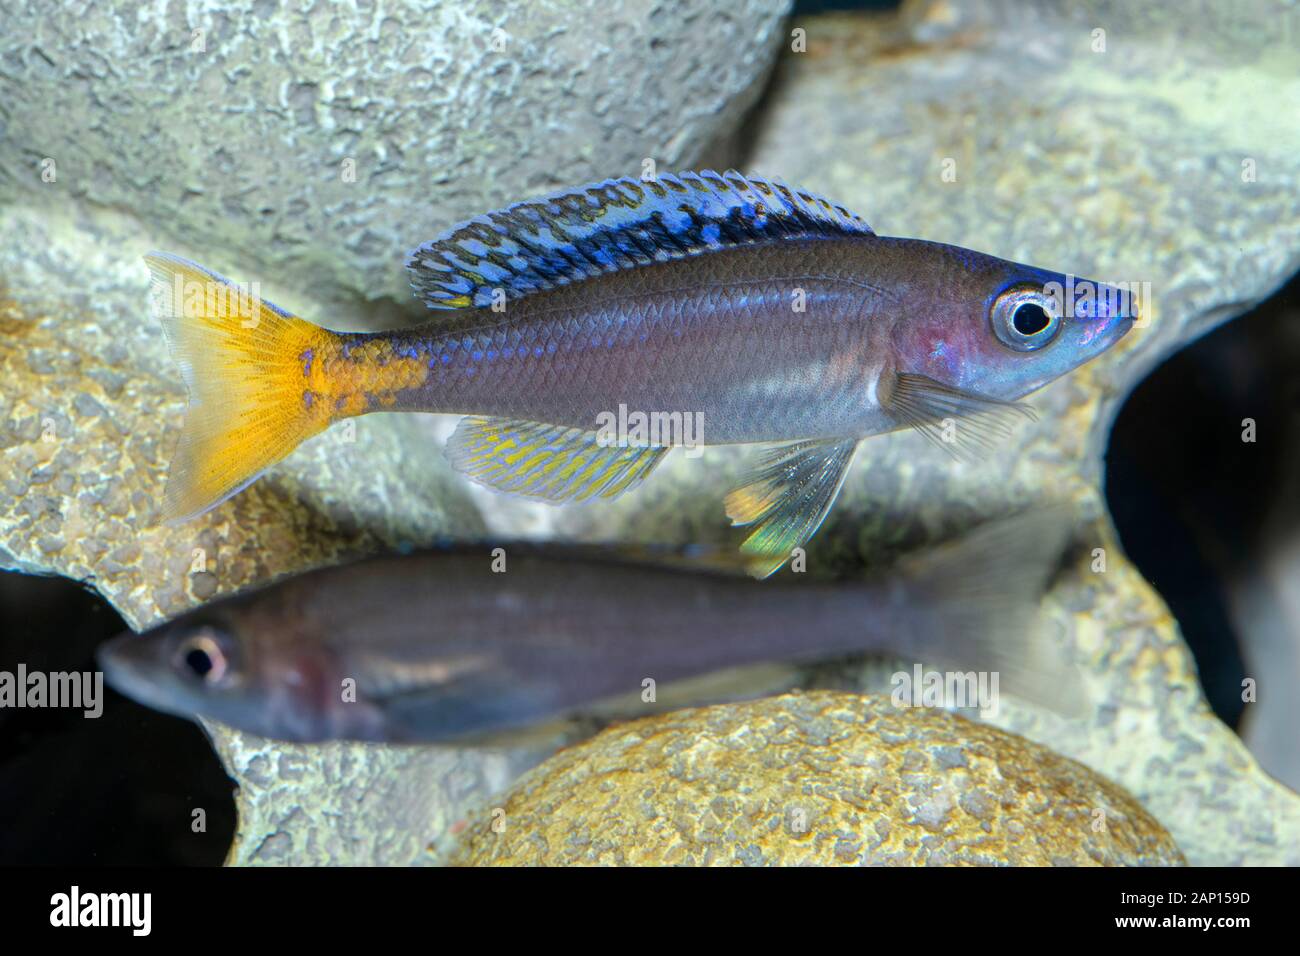 Slender Cichlid (Cyprichromis leptosoma). Two fishes in an aquarium Stock Photo